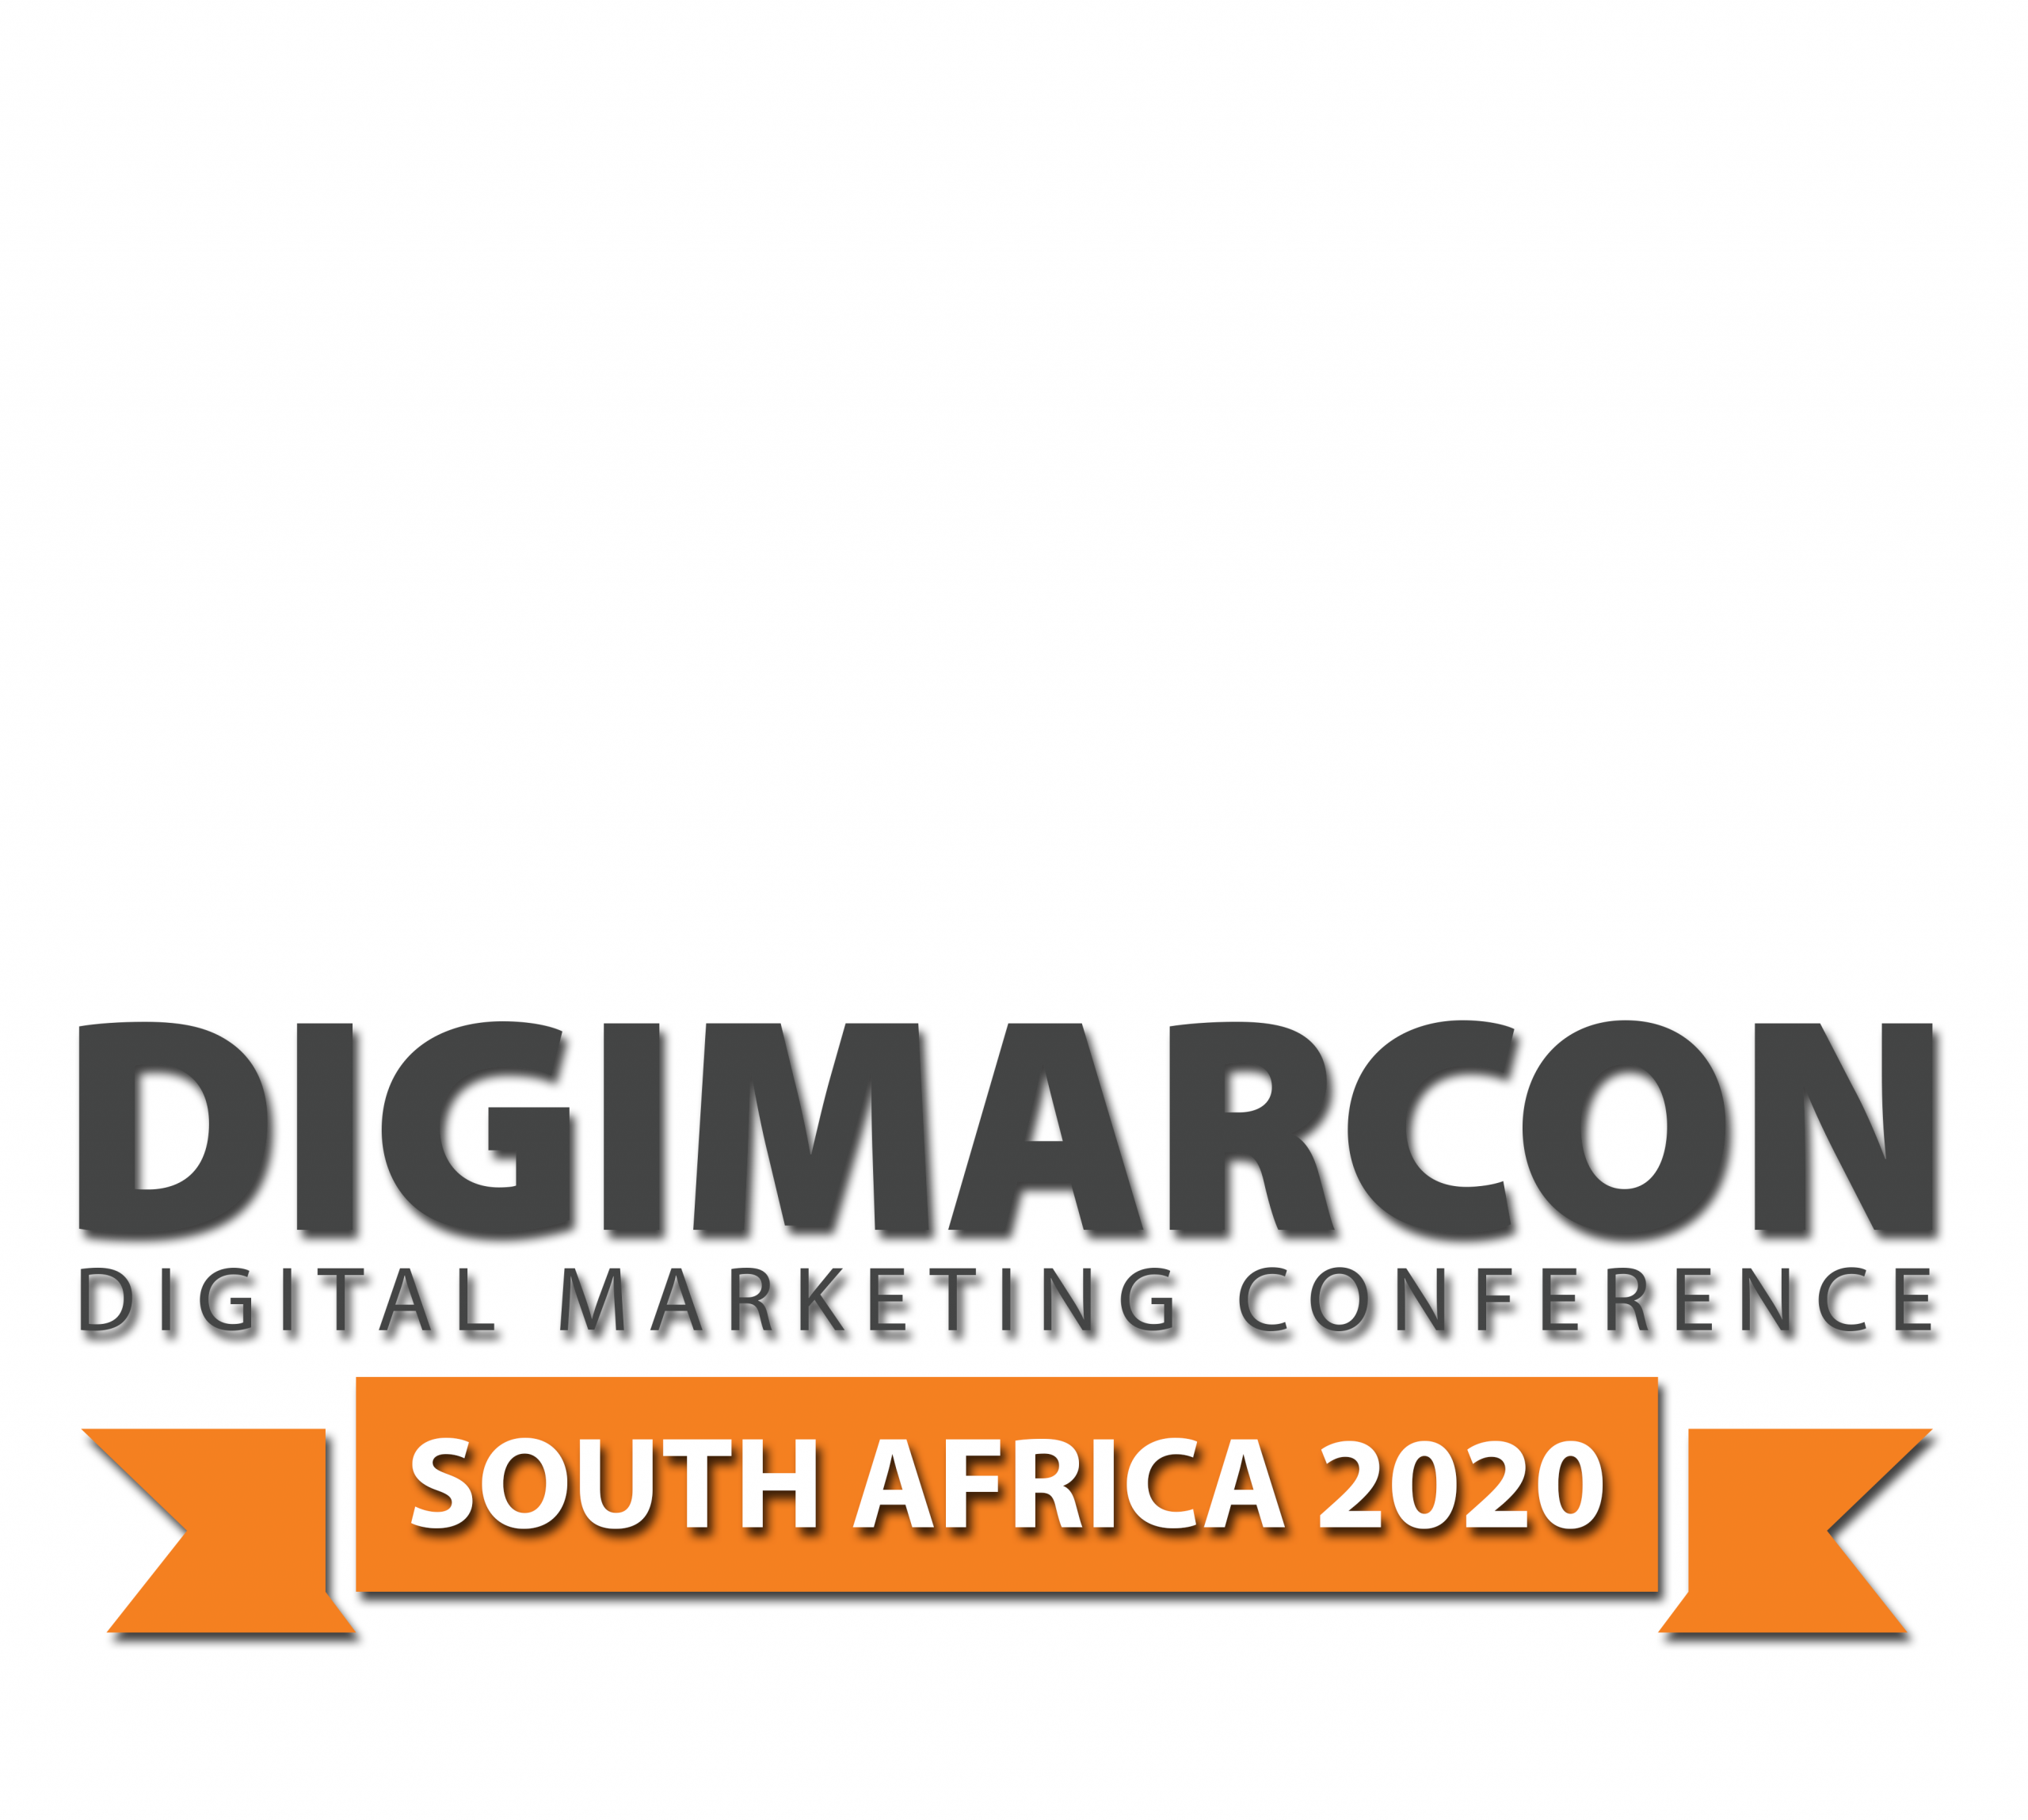 South Africa Digital Marketing, Media and Advertising Conference